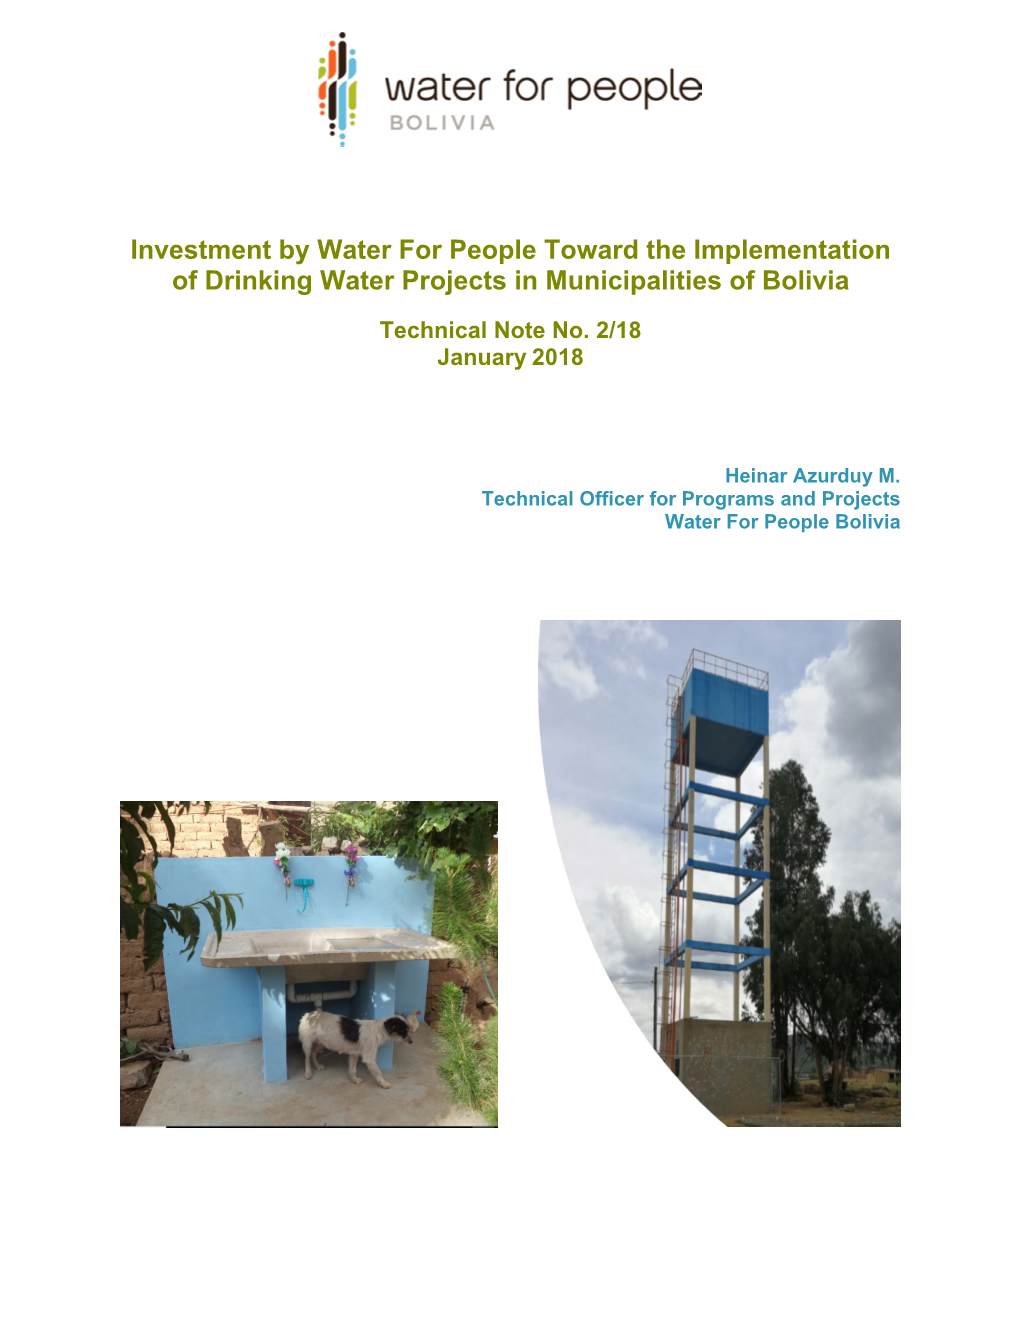 Investment for Implementation of Water Projects